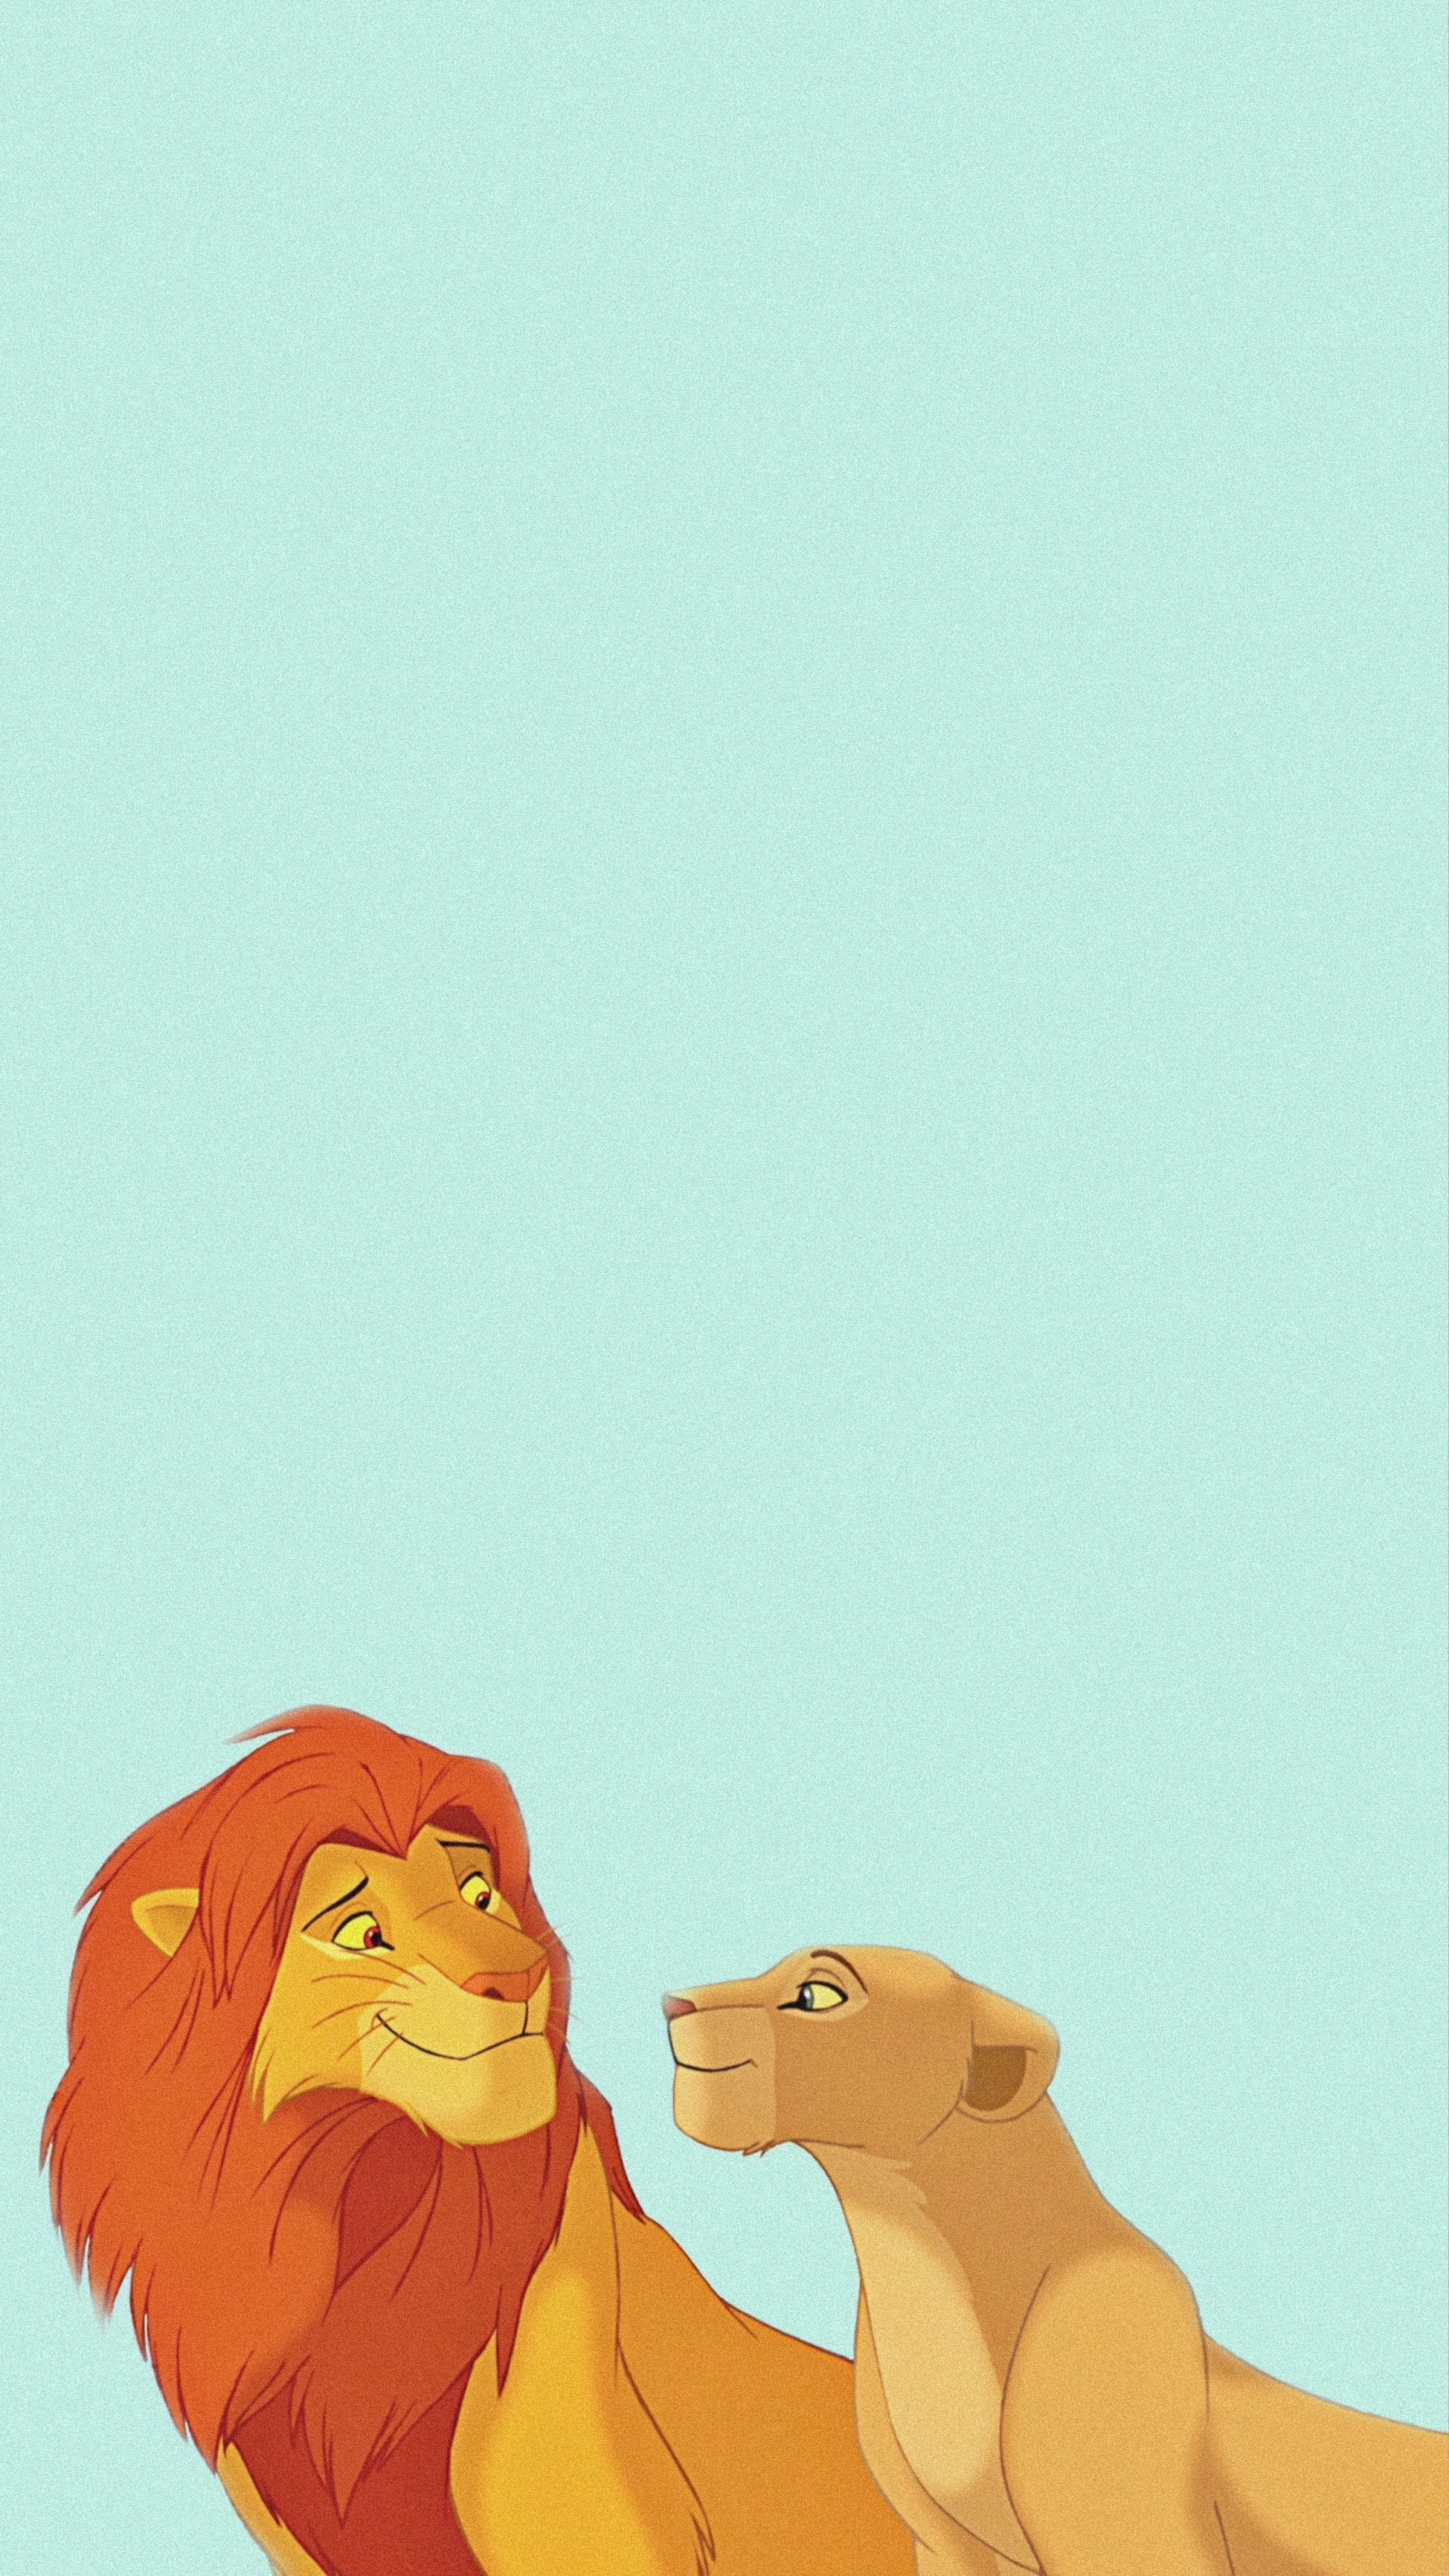 Aesthetic wallpaper of Simba and Nala from The Lion King. - The Lion King